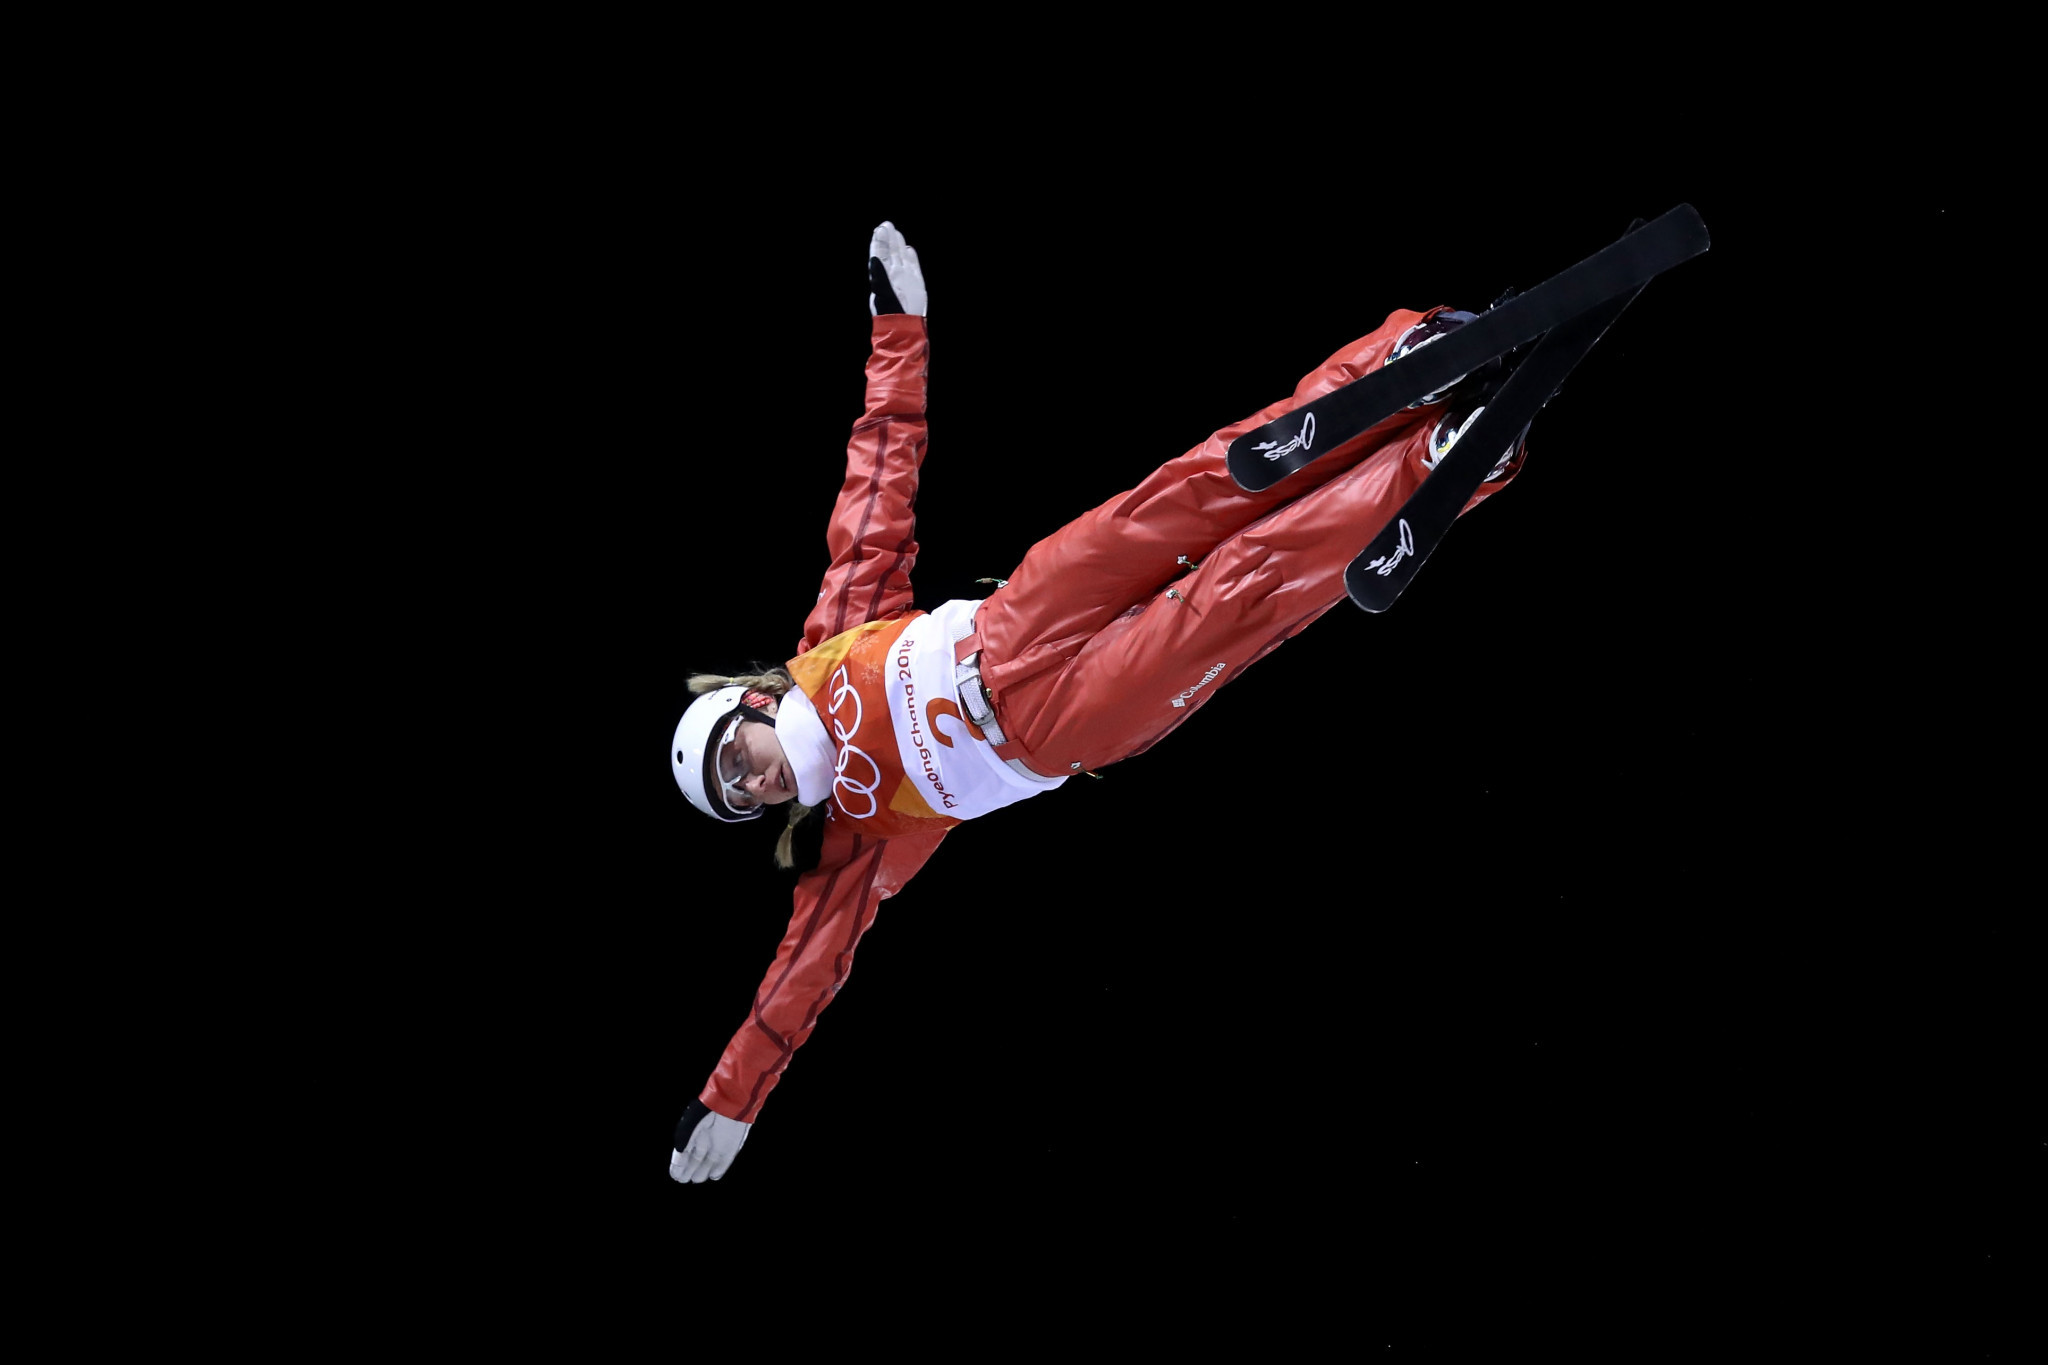 Reigning Olympic aerials champion Hanna Huskova won the women's event in Moscow ©Getty Images